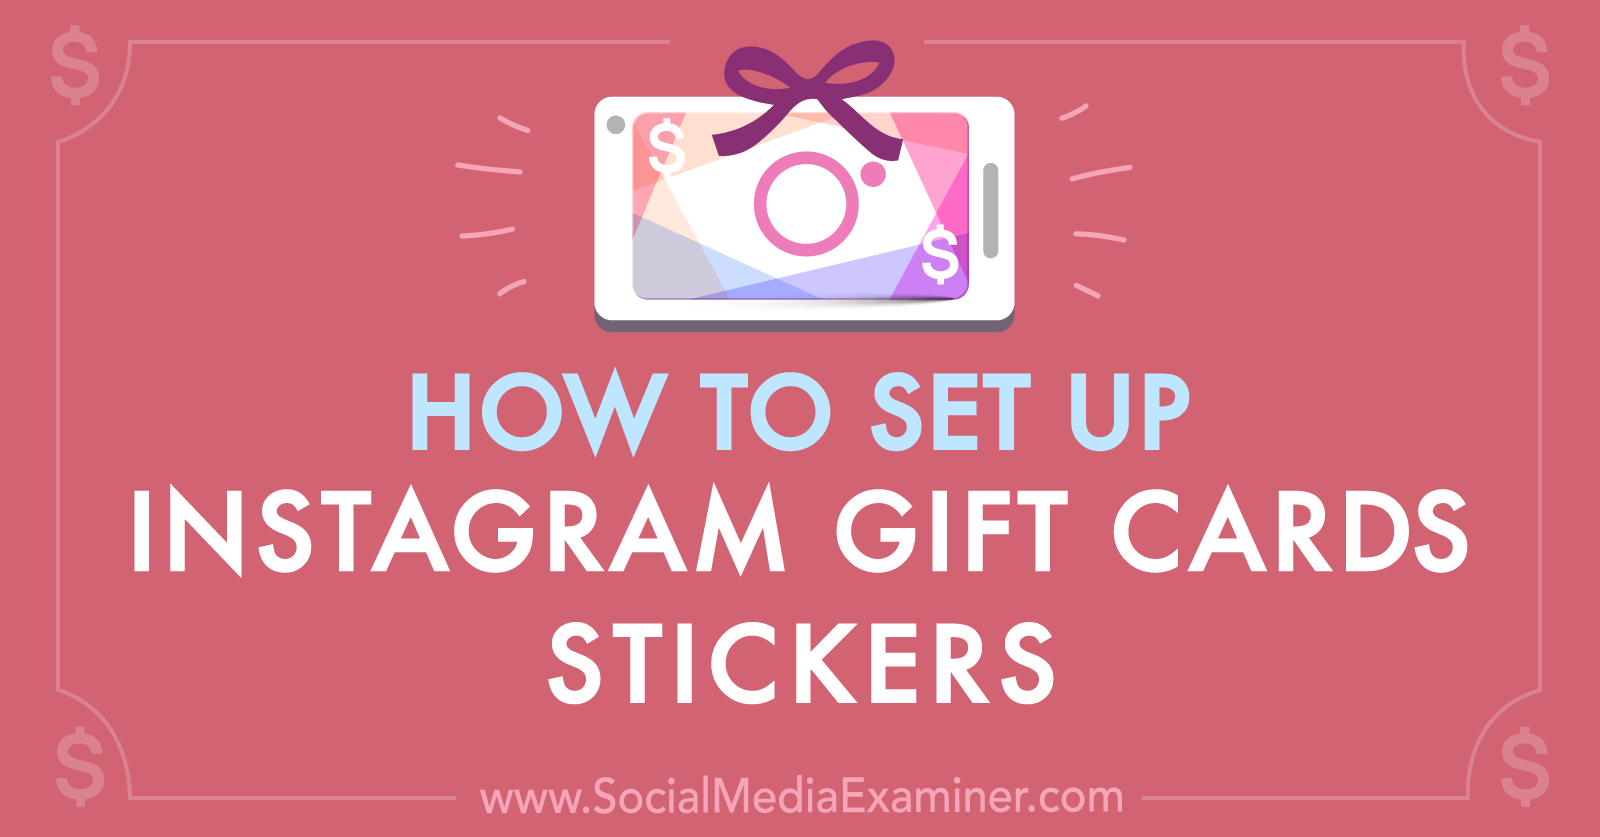 Instagram Gift Cards Stickers How To Set Up 800@2x